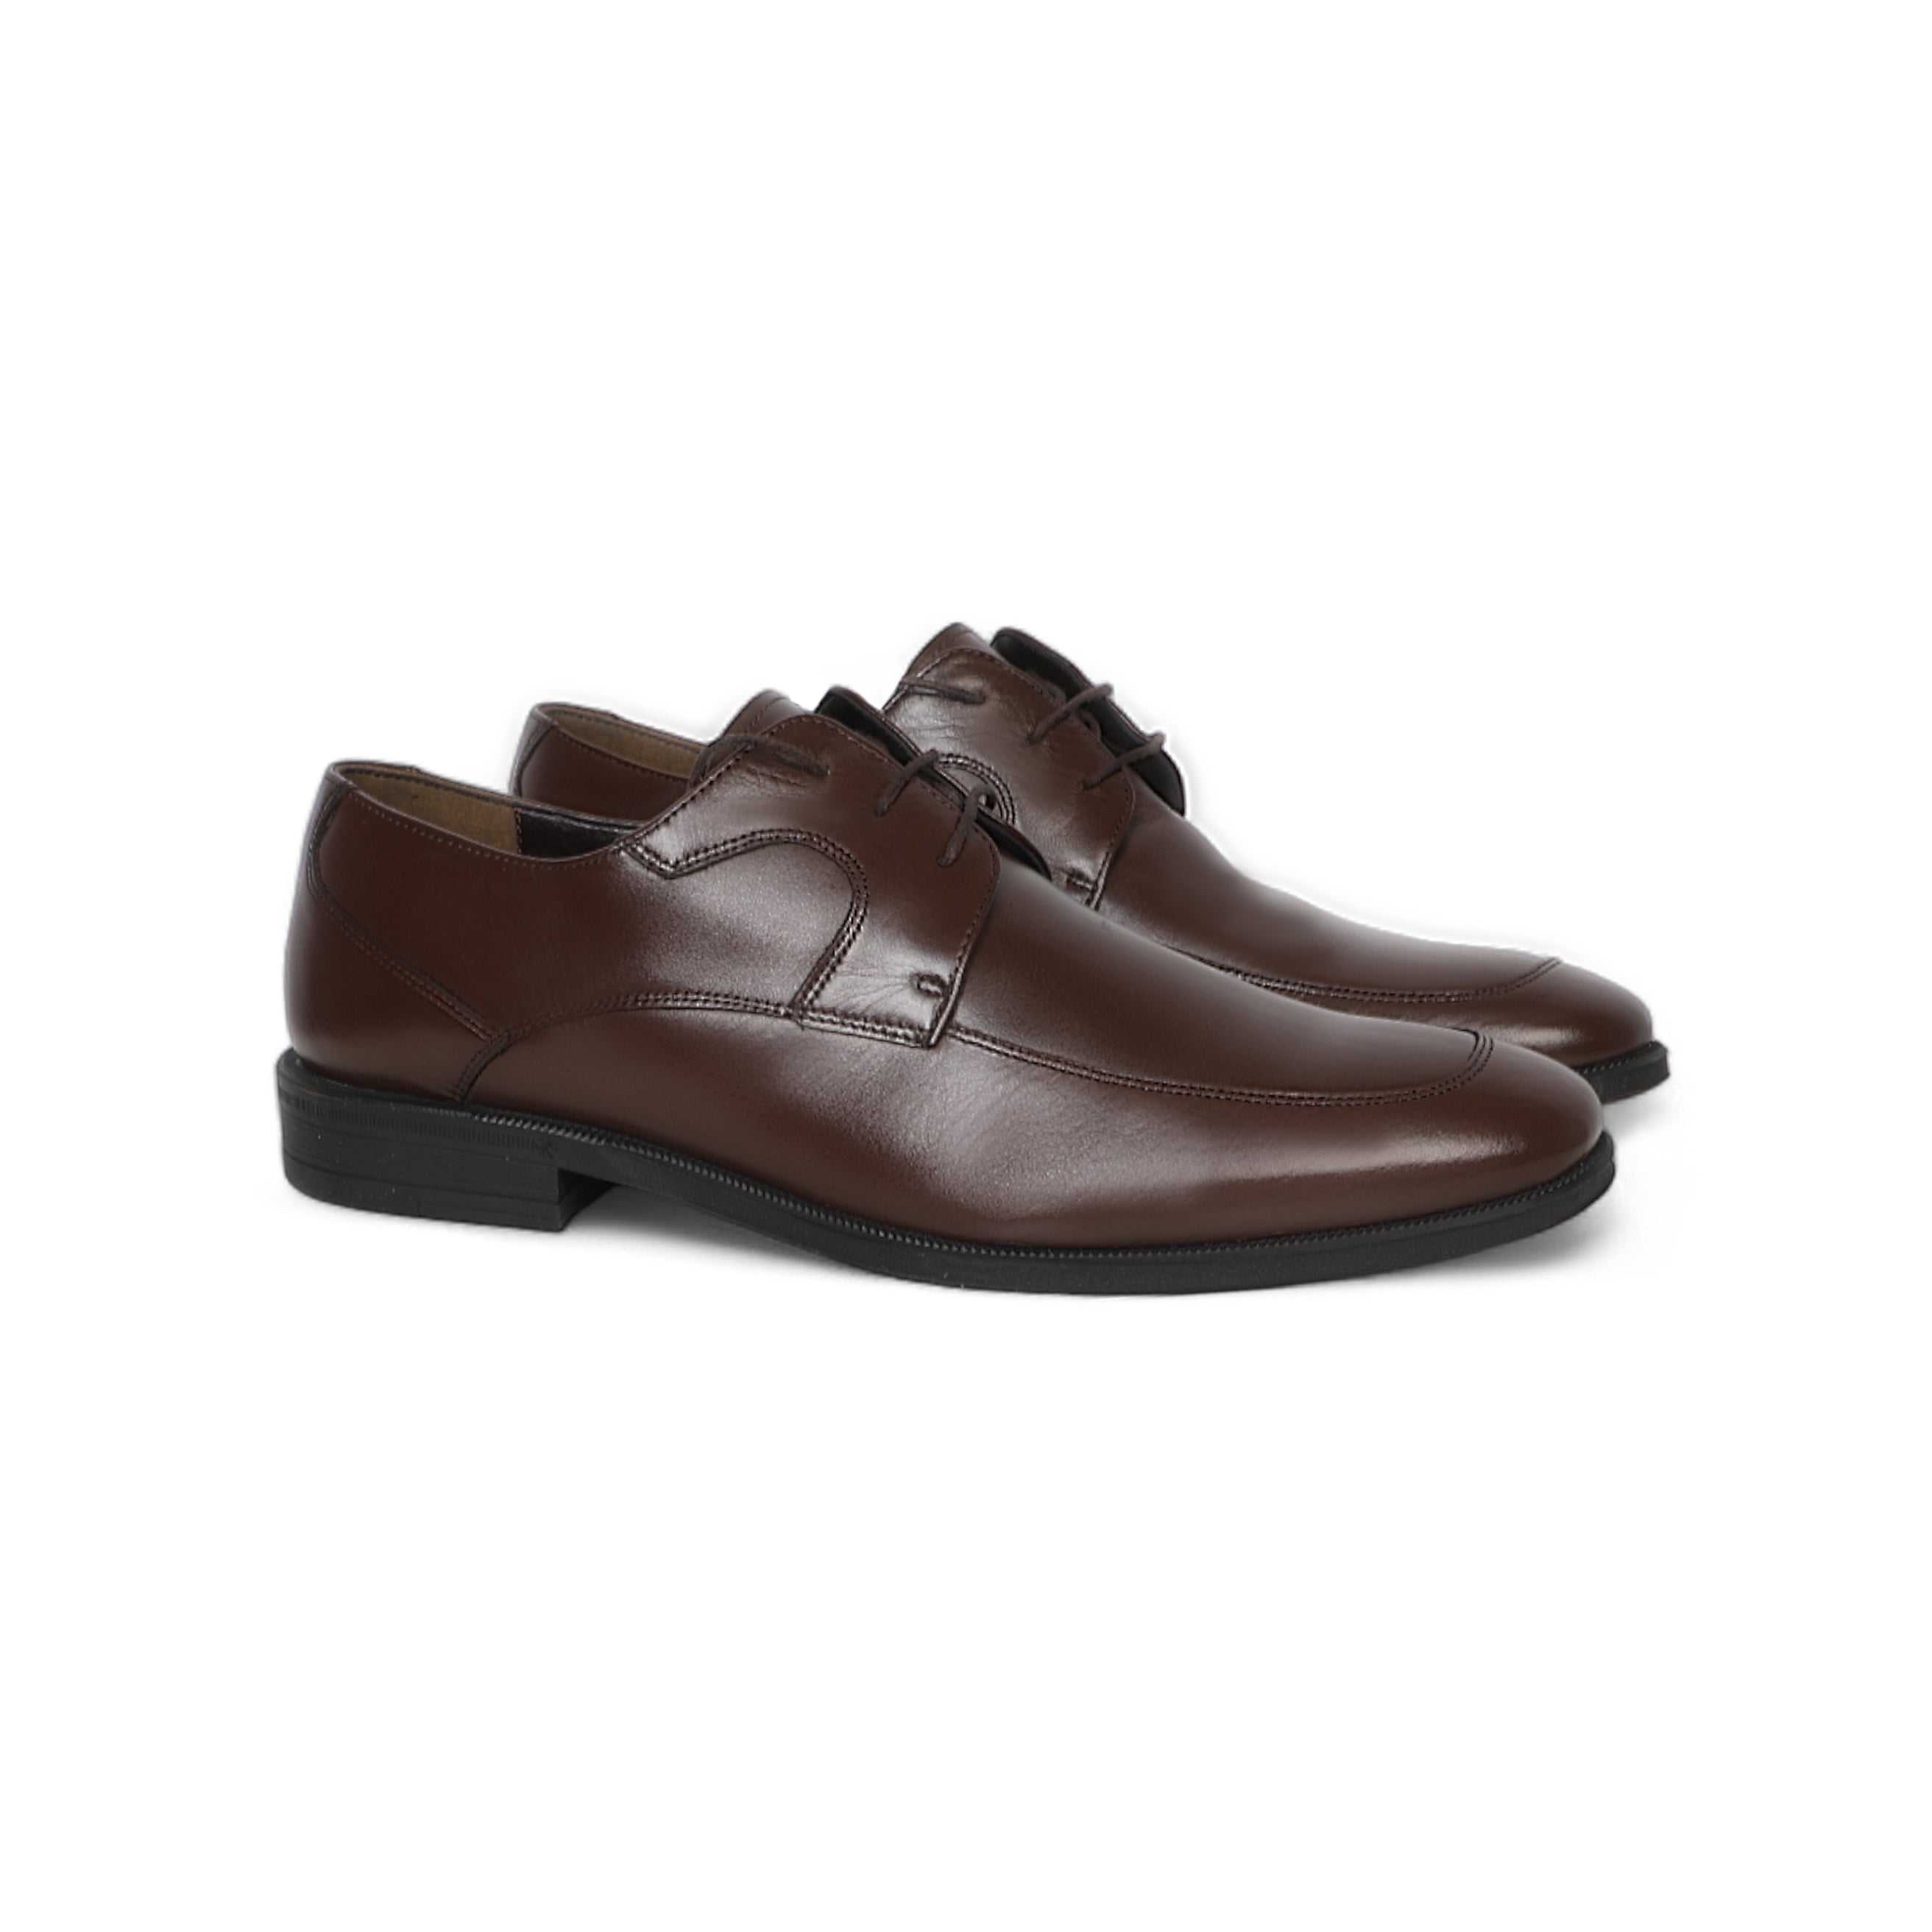 Classic Brown Shoes With Black Insole